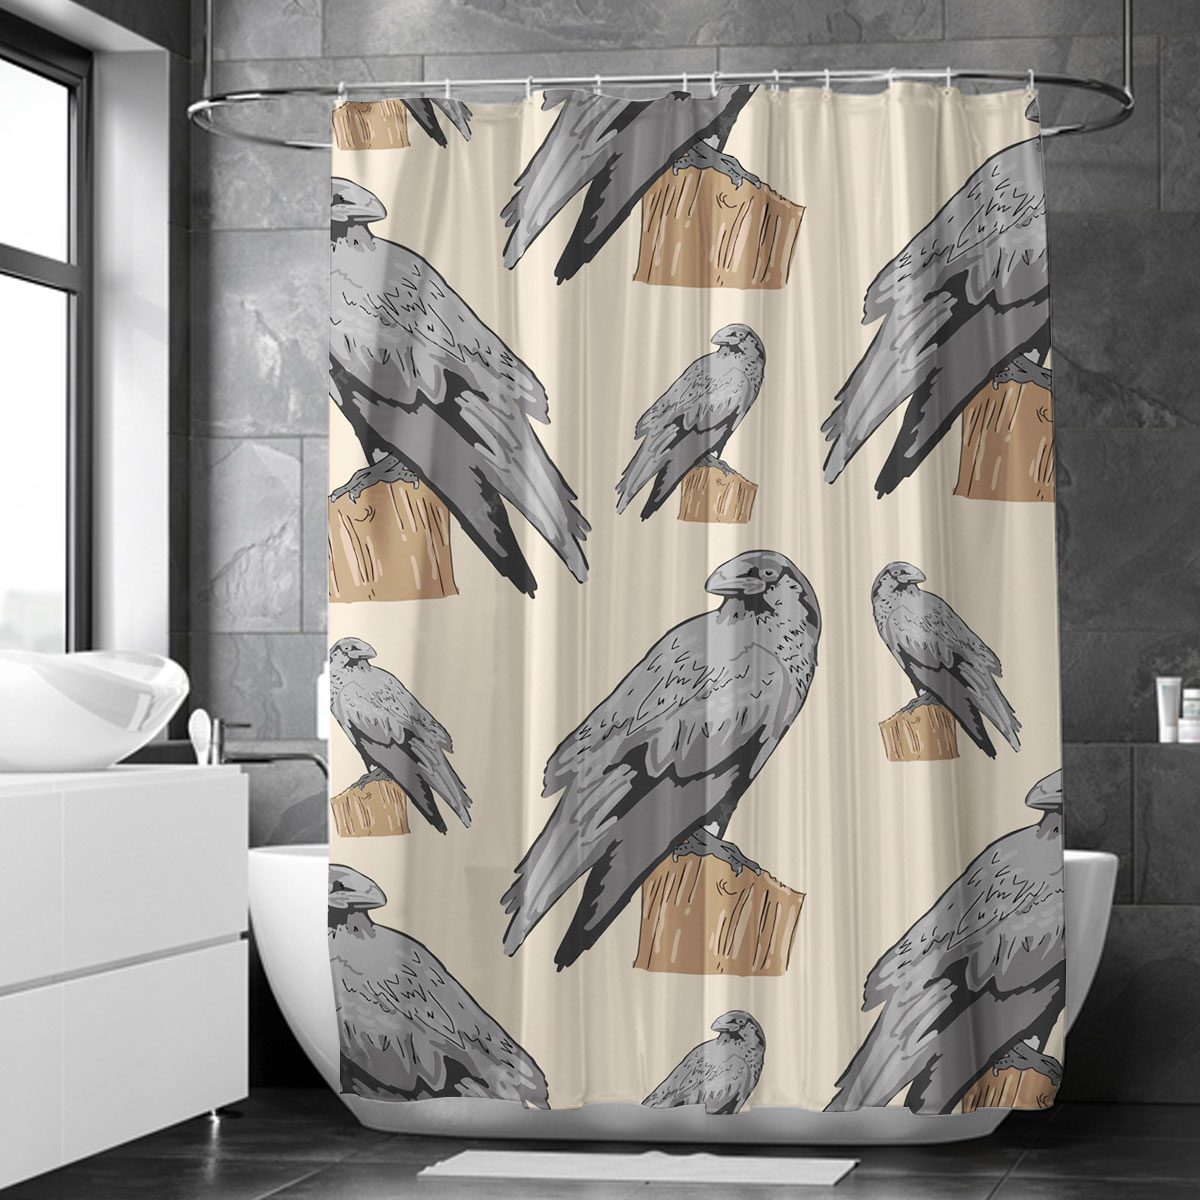 Standing Gray Crow Shower Curtain